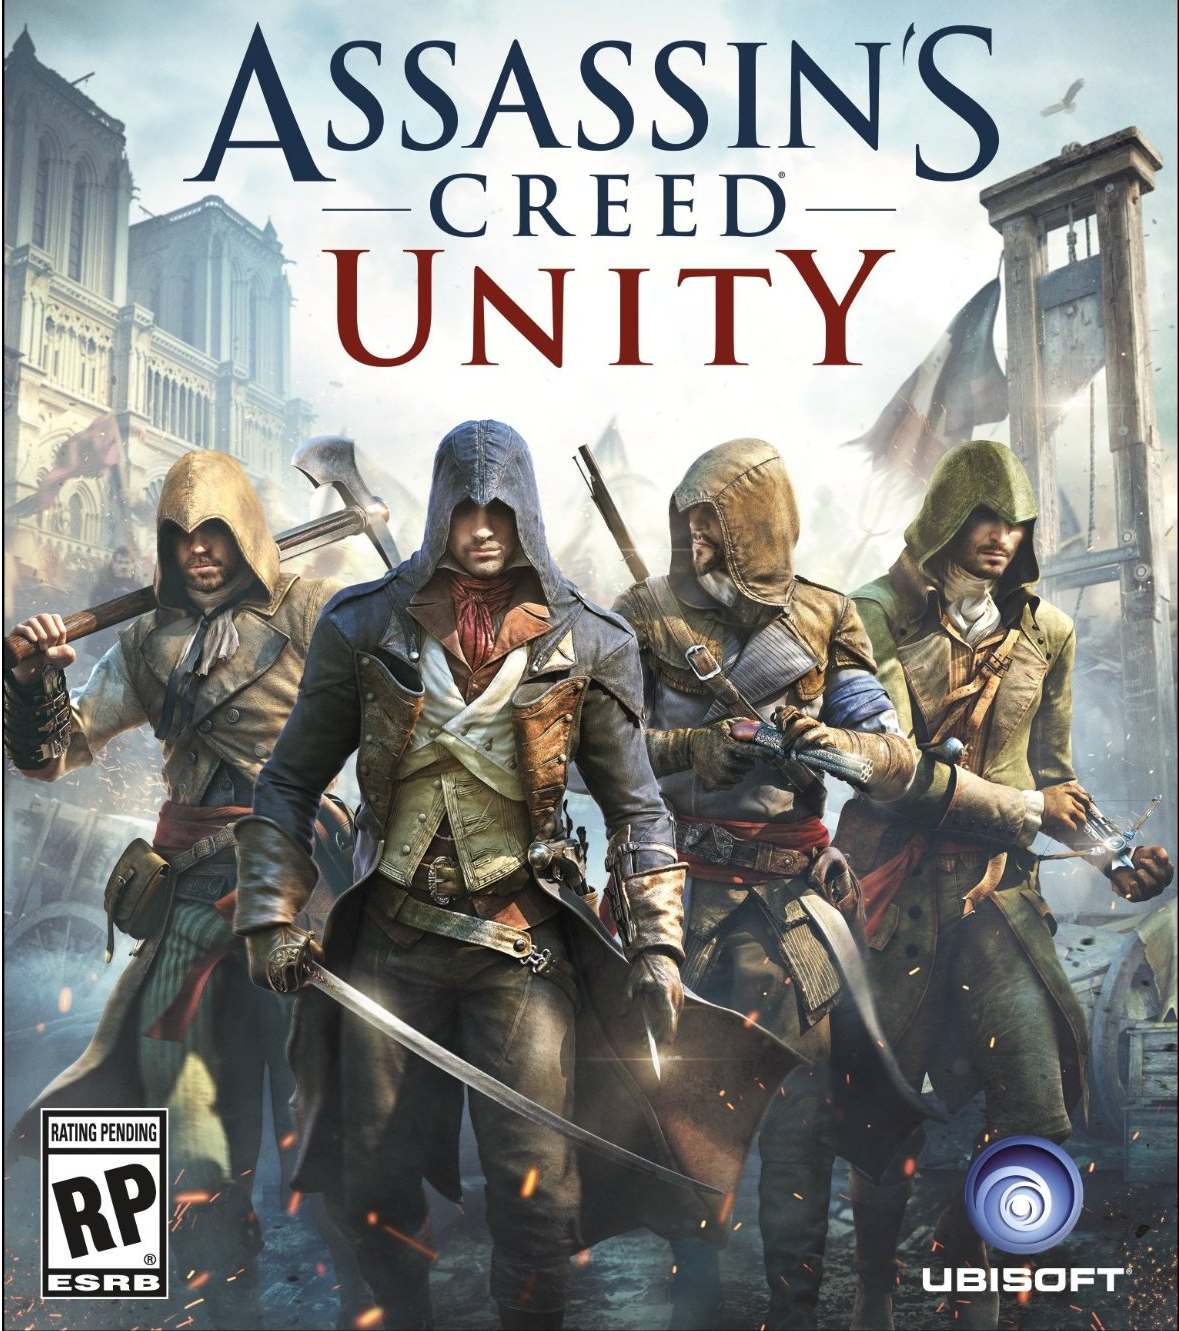  Assassin's Creed Unity - Xbox One : Ubisoft: Video Games